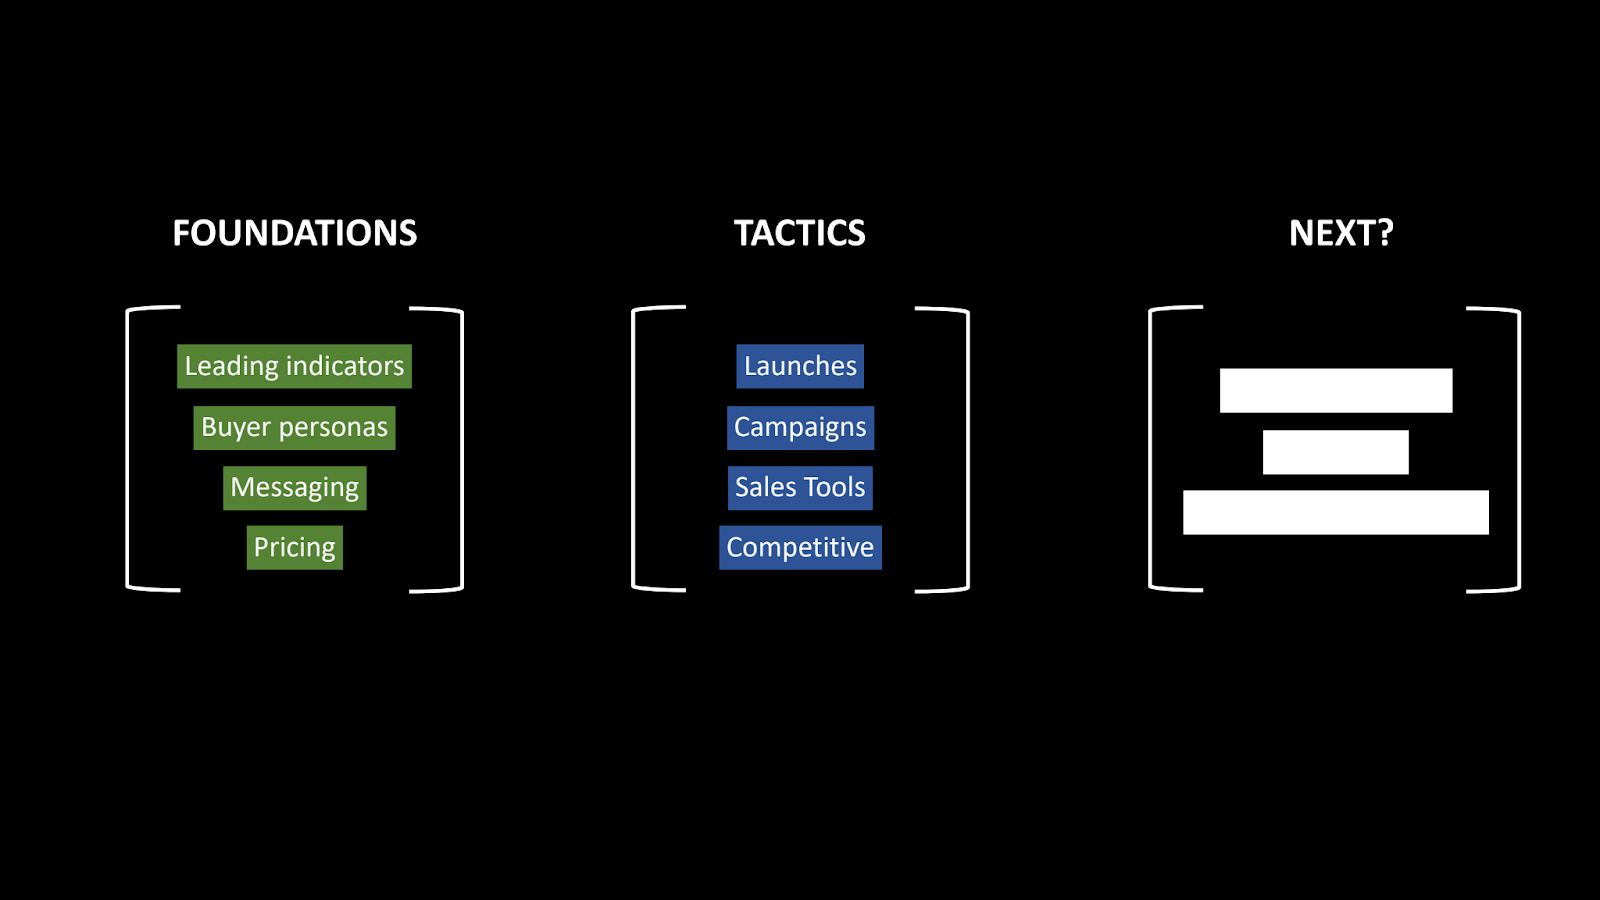 Image showing the foundations of PMM (leading indicators, buyer personas, messaging, and pricing) and tactics (launches, campaigns, sales tools, competitive intel)